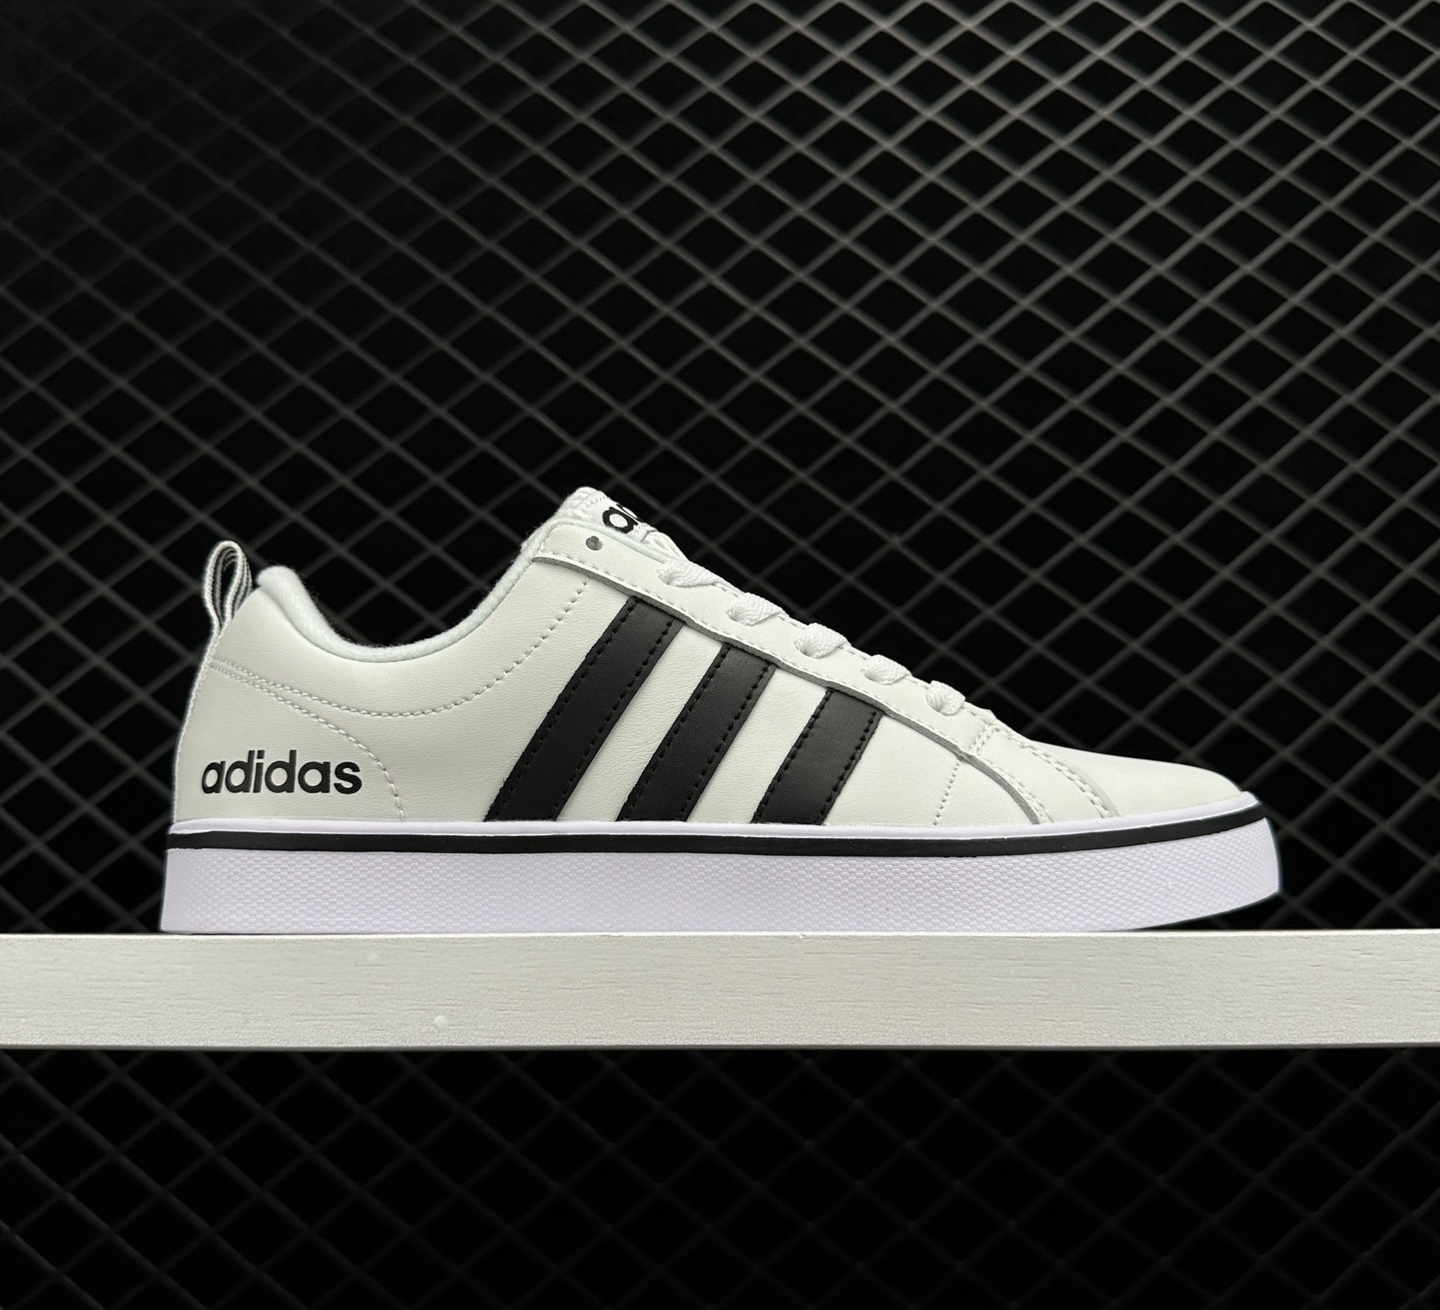 Adidas VS Pace White Black FY8558 - Classic Styling for Every Day